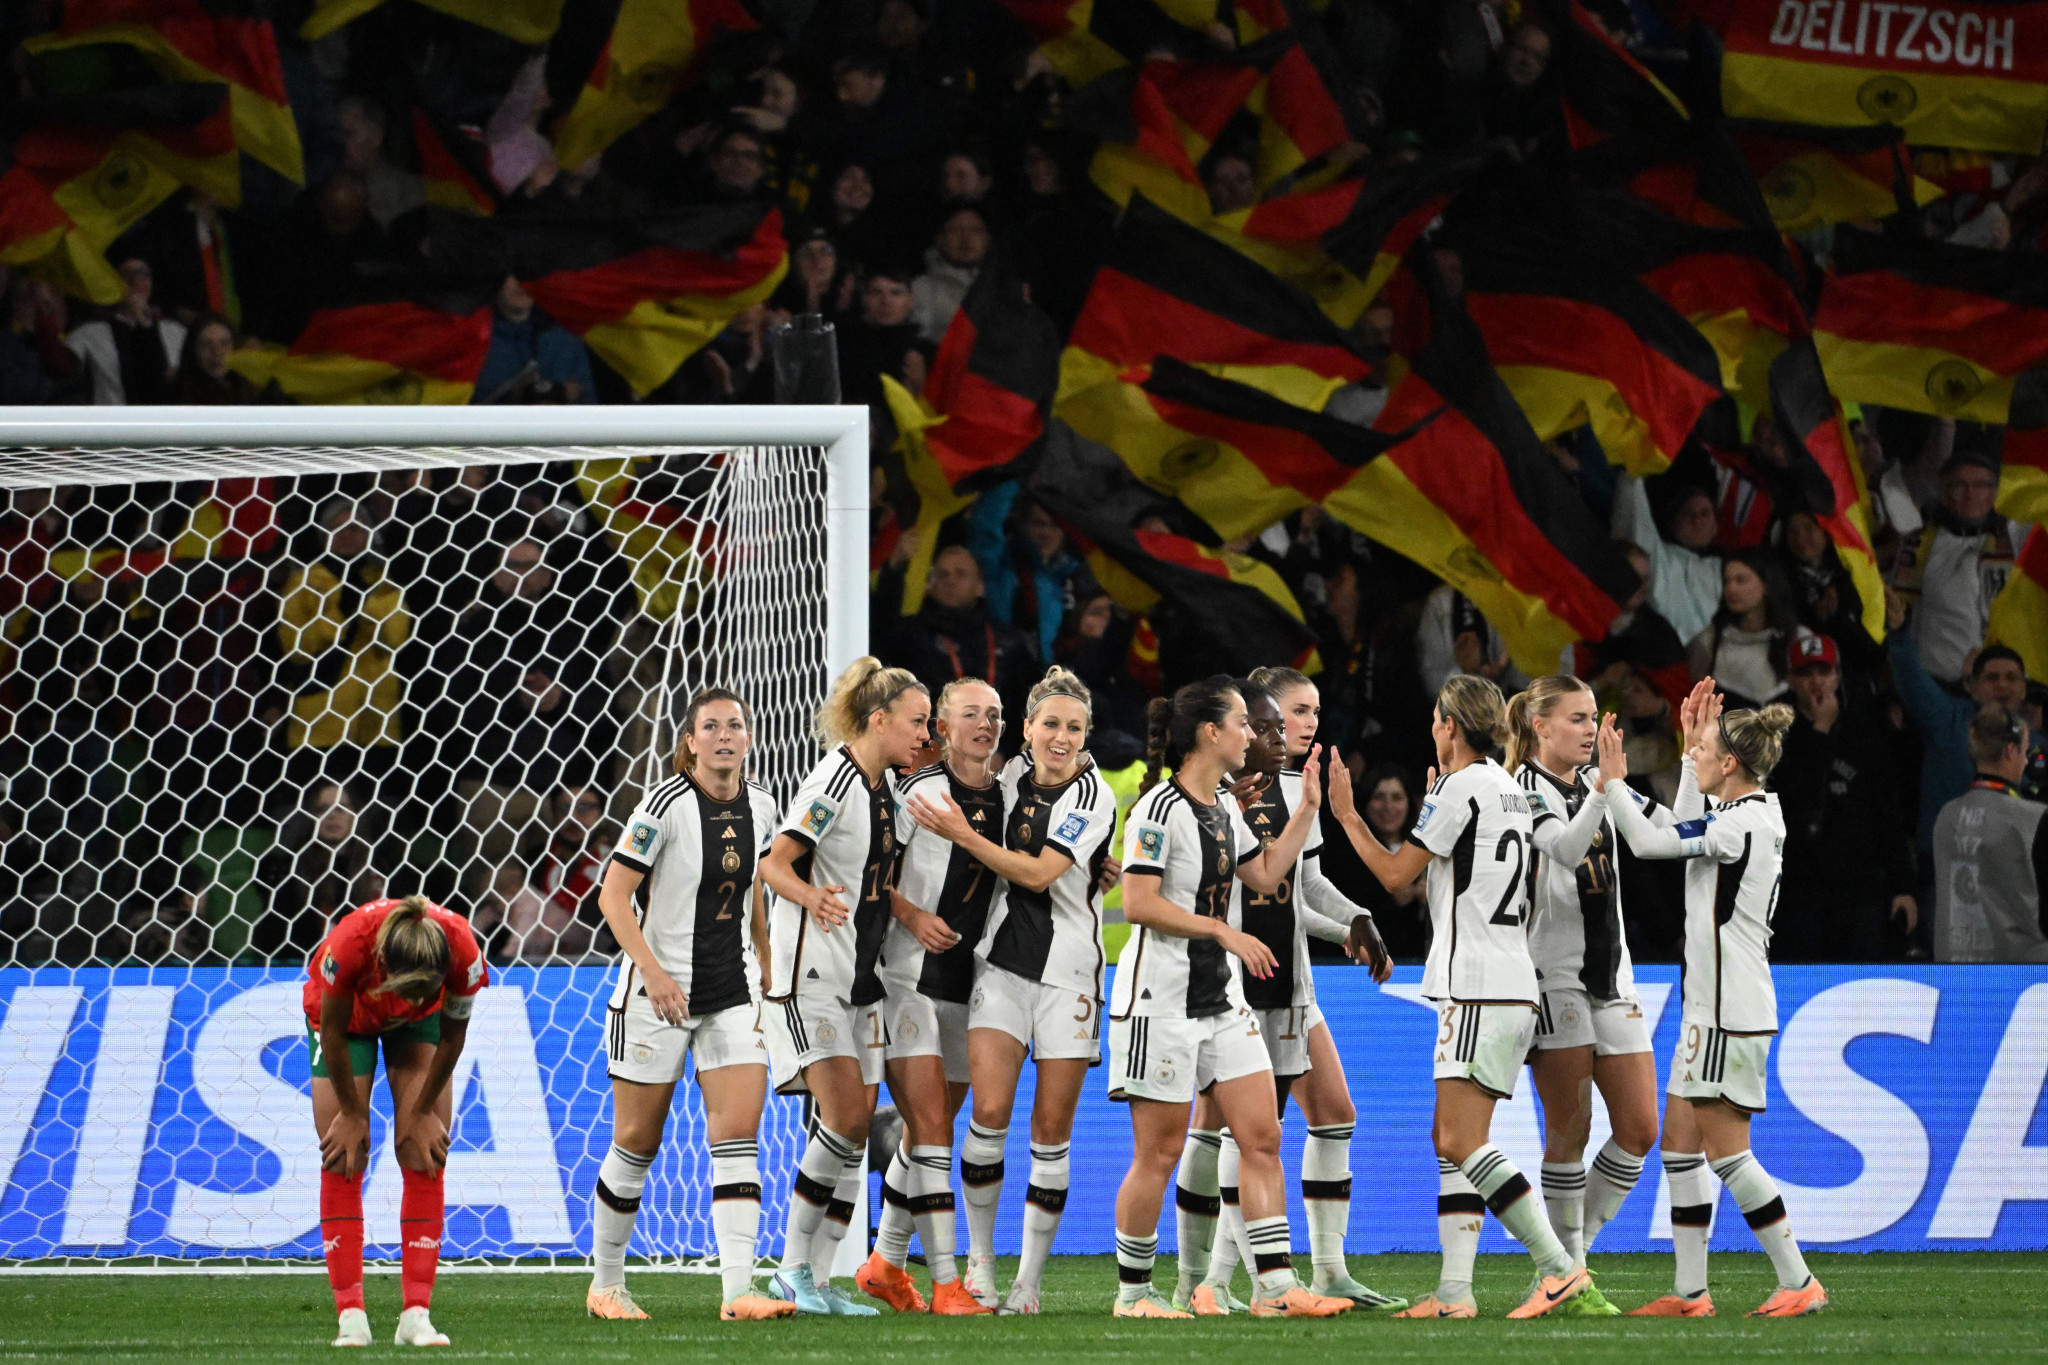 World number two side Germany recorded the biggest win of the FIFA Women's World Cup so far with their 6-0 thrashing of Morocco in Melbourne ©Getty Images